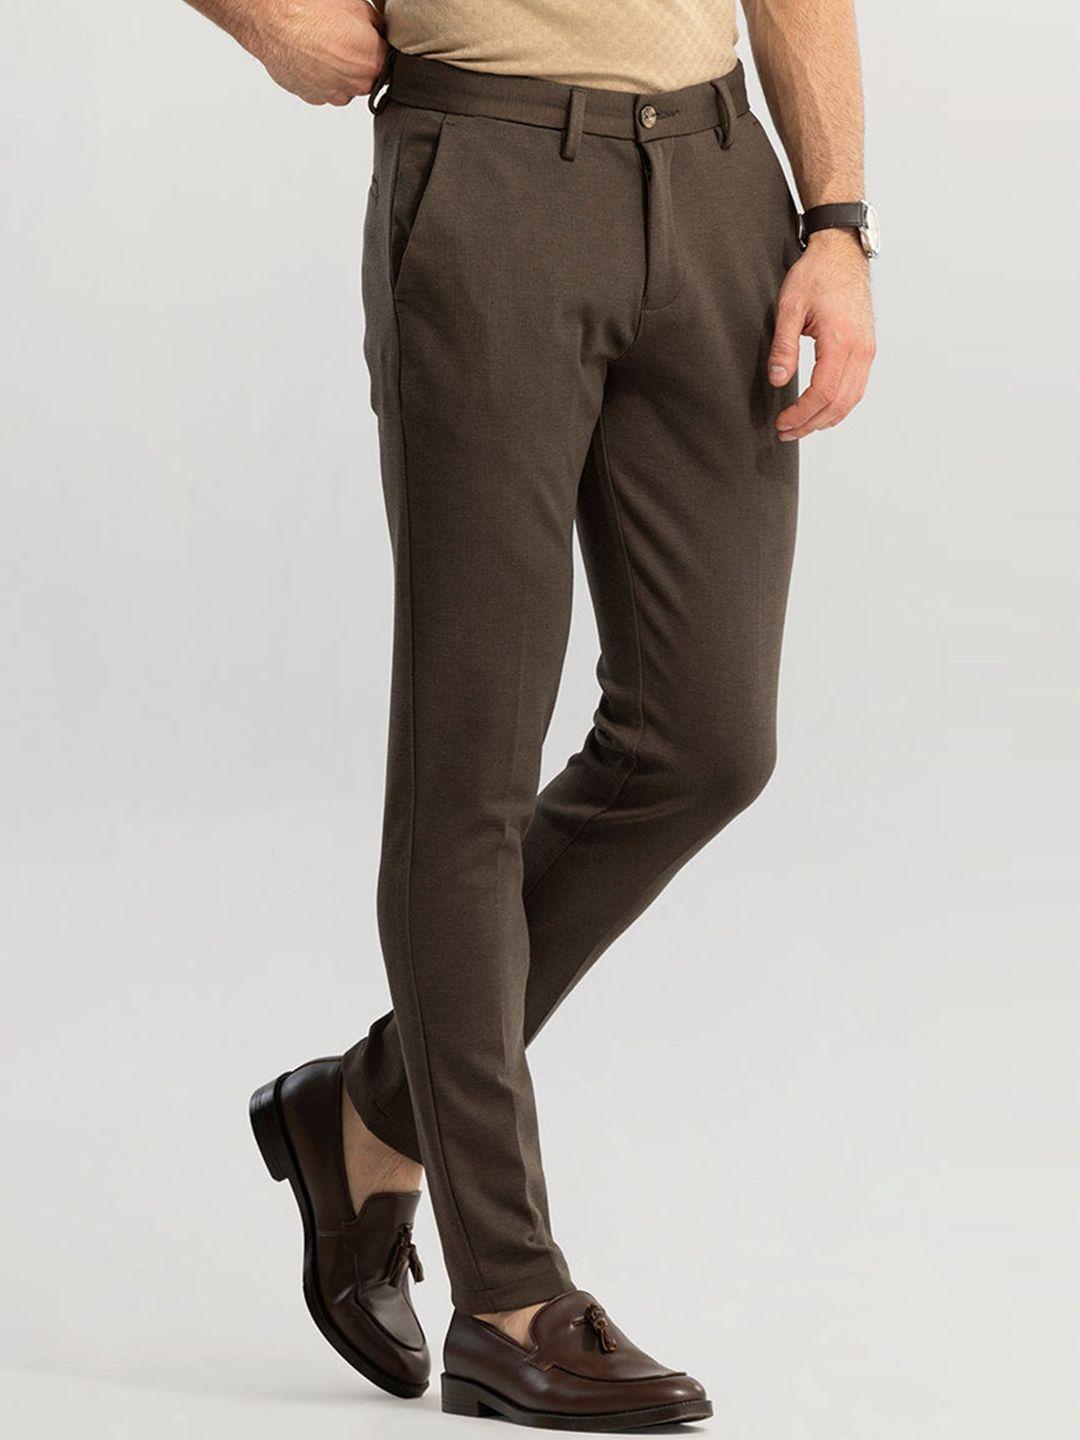 snitch-men-olive-green-slim-fit-chinos-trousers